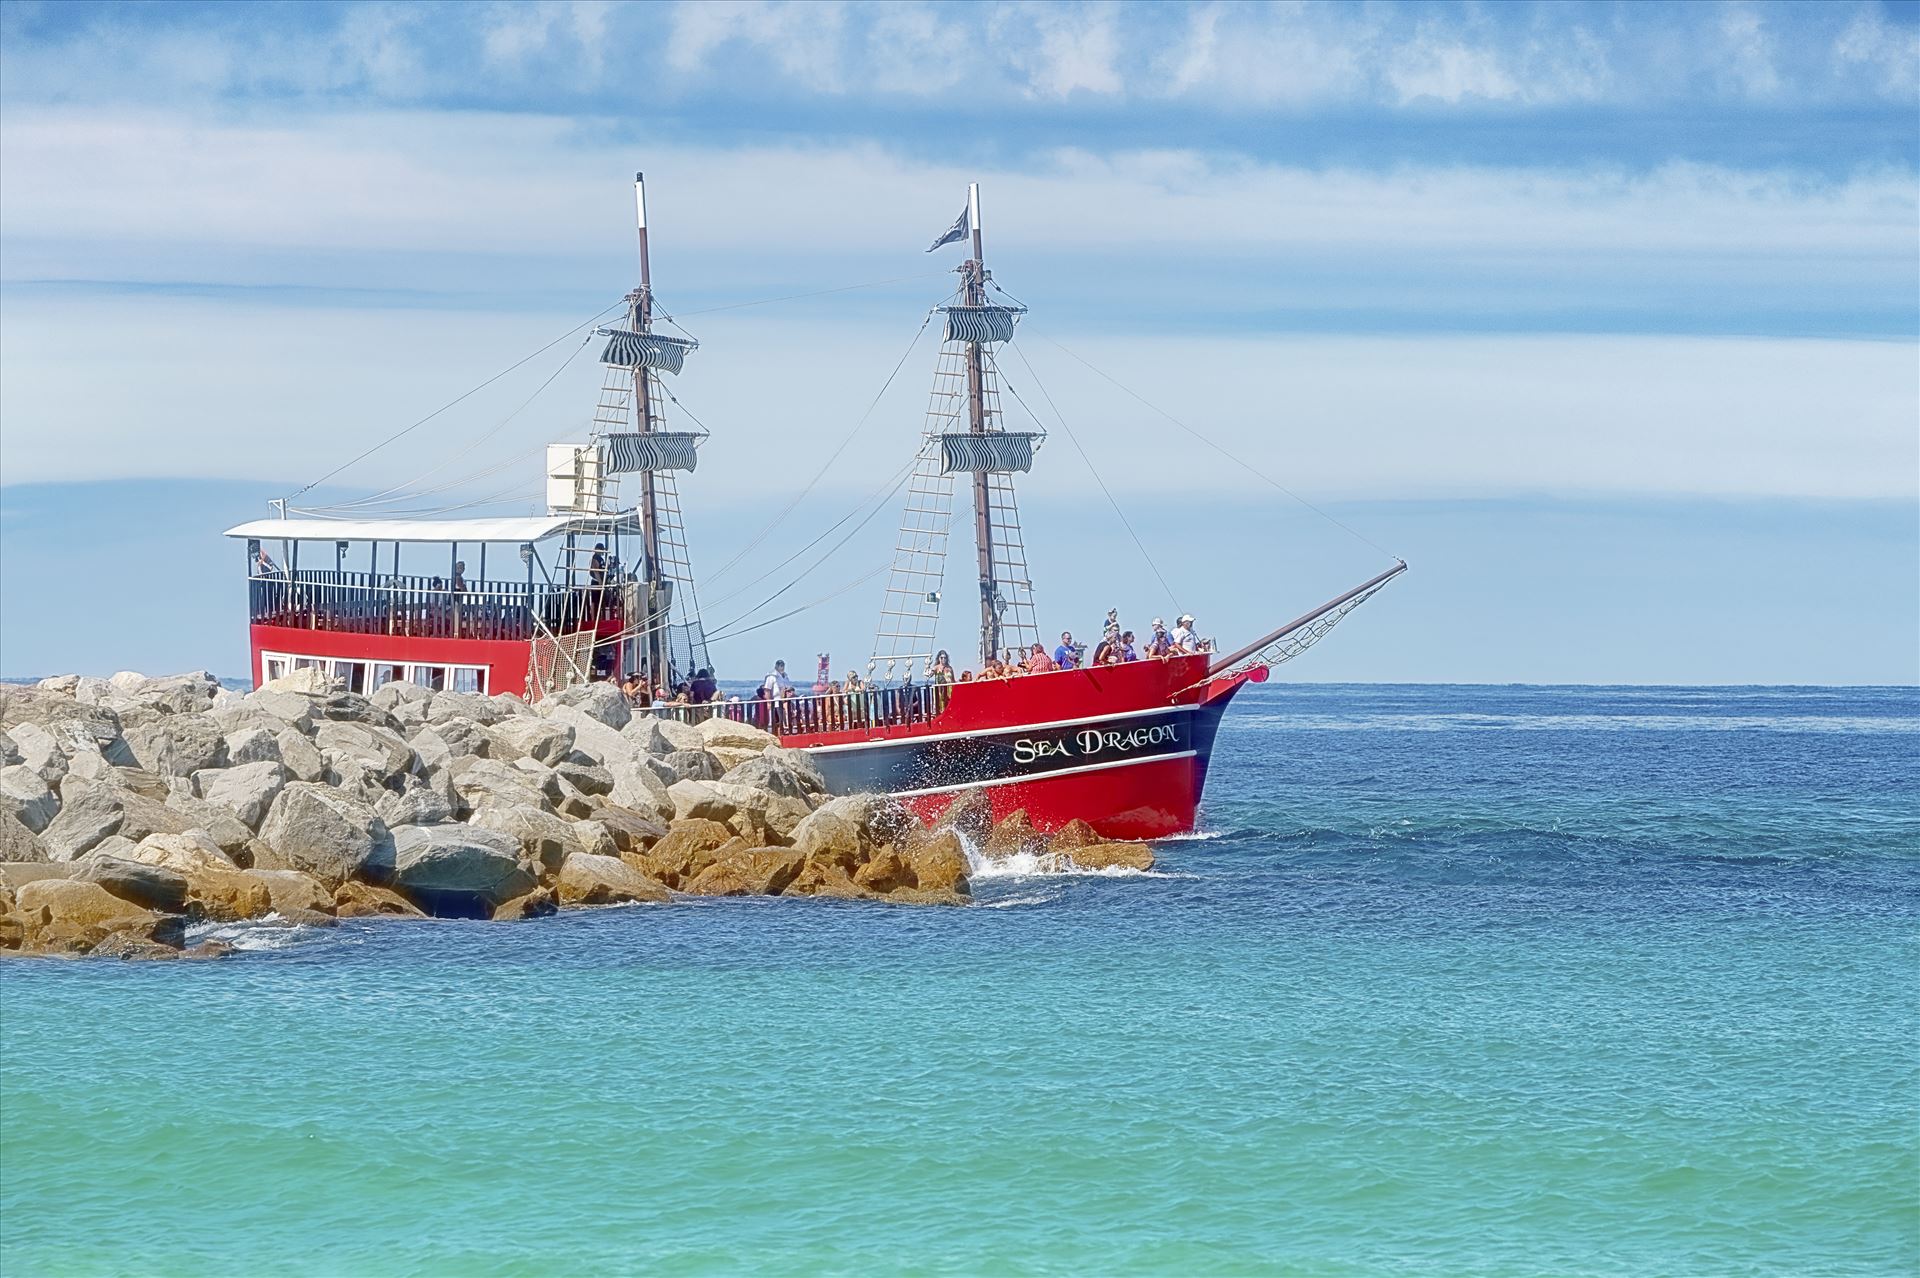 sea dragon at the jetties st. andrews state park sf 8500309.jpg - The Sea Dragon pirate ship leaving the pass rounding the jetties and entering the gulf of mexico at Panama City, Florida by Terry Kelly Photography